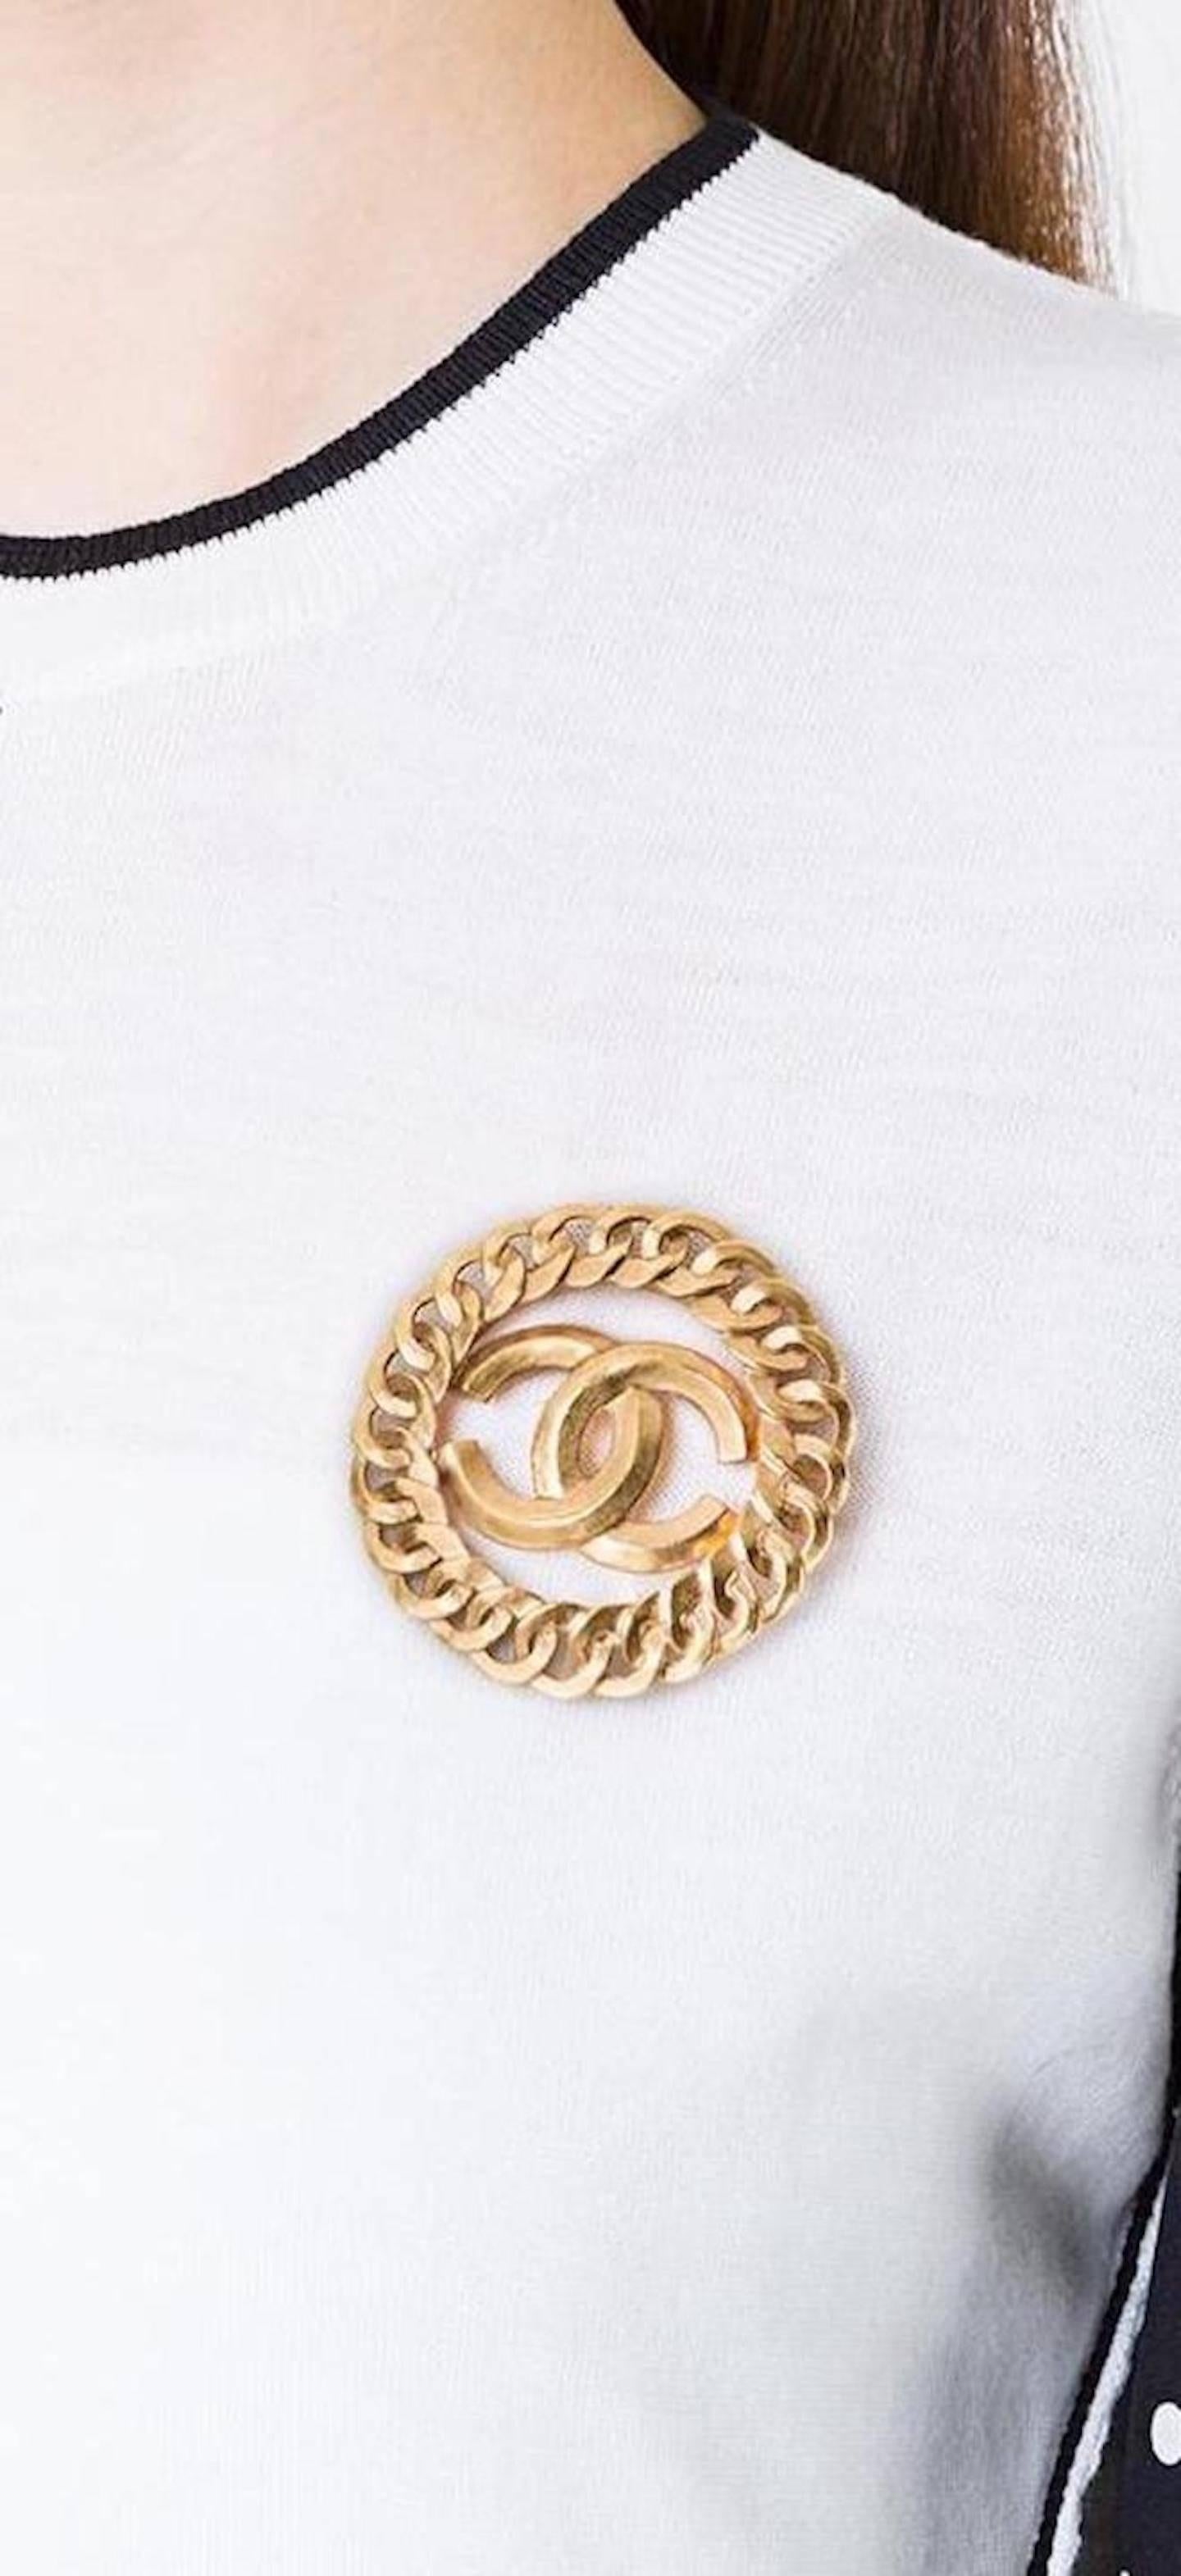 CURATOR'S NOTES

Chanel Vintage Gold Chain Link Signature Charm Pin Brooch

Metal
Gold tone
Pin closure
Made in France
Diameter 1.6"